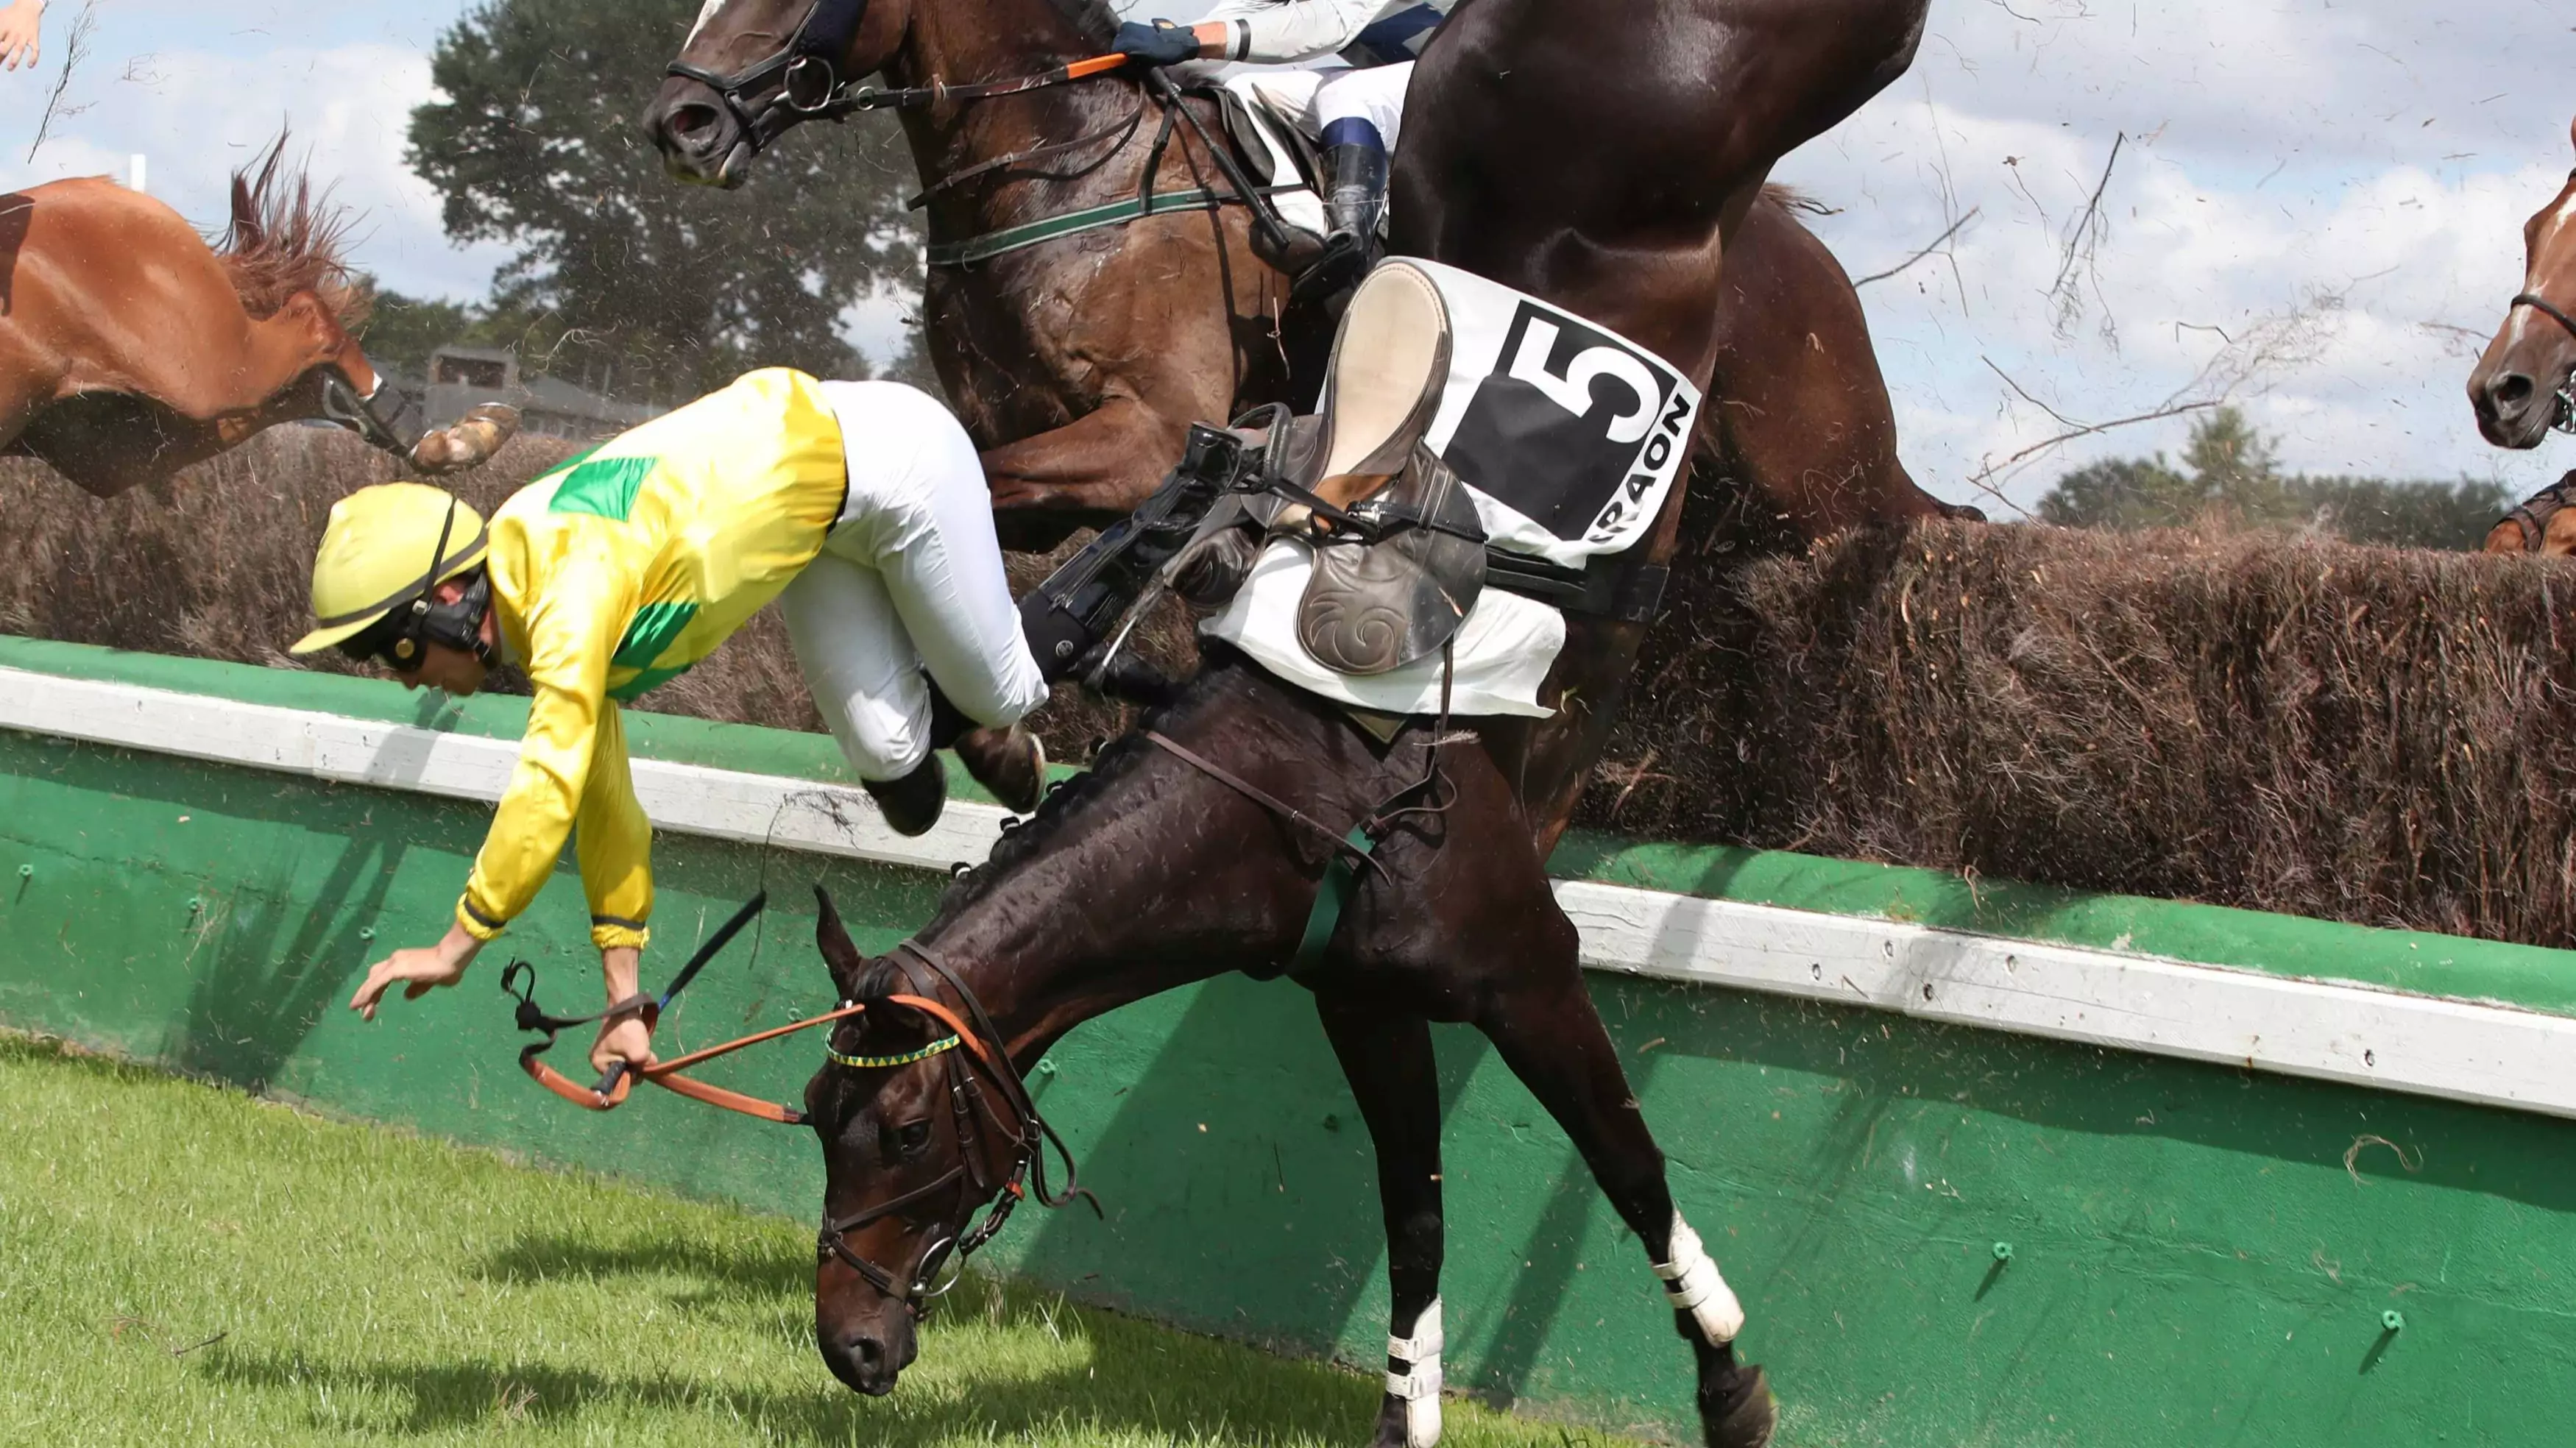 Jockey's Jaw Broken After A Rival Horse's Hoof Hits Him In The Face